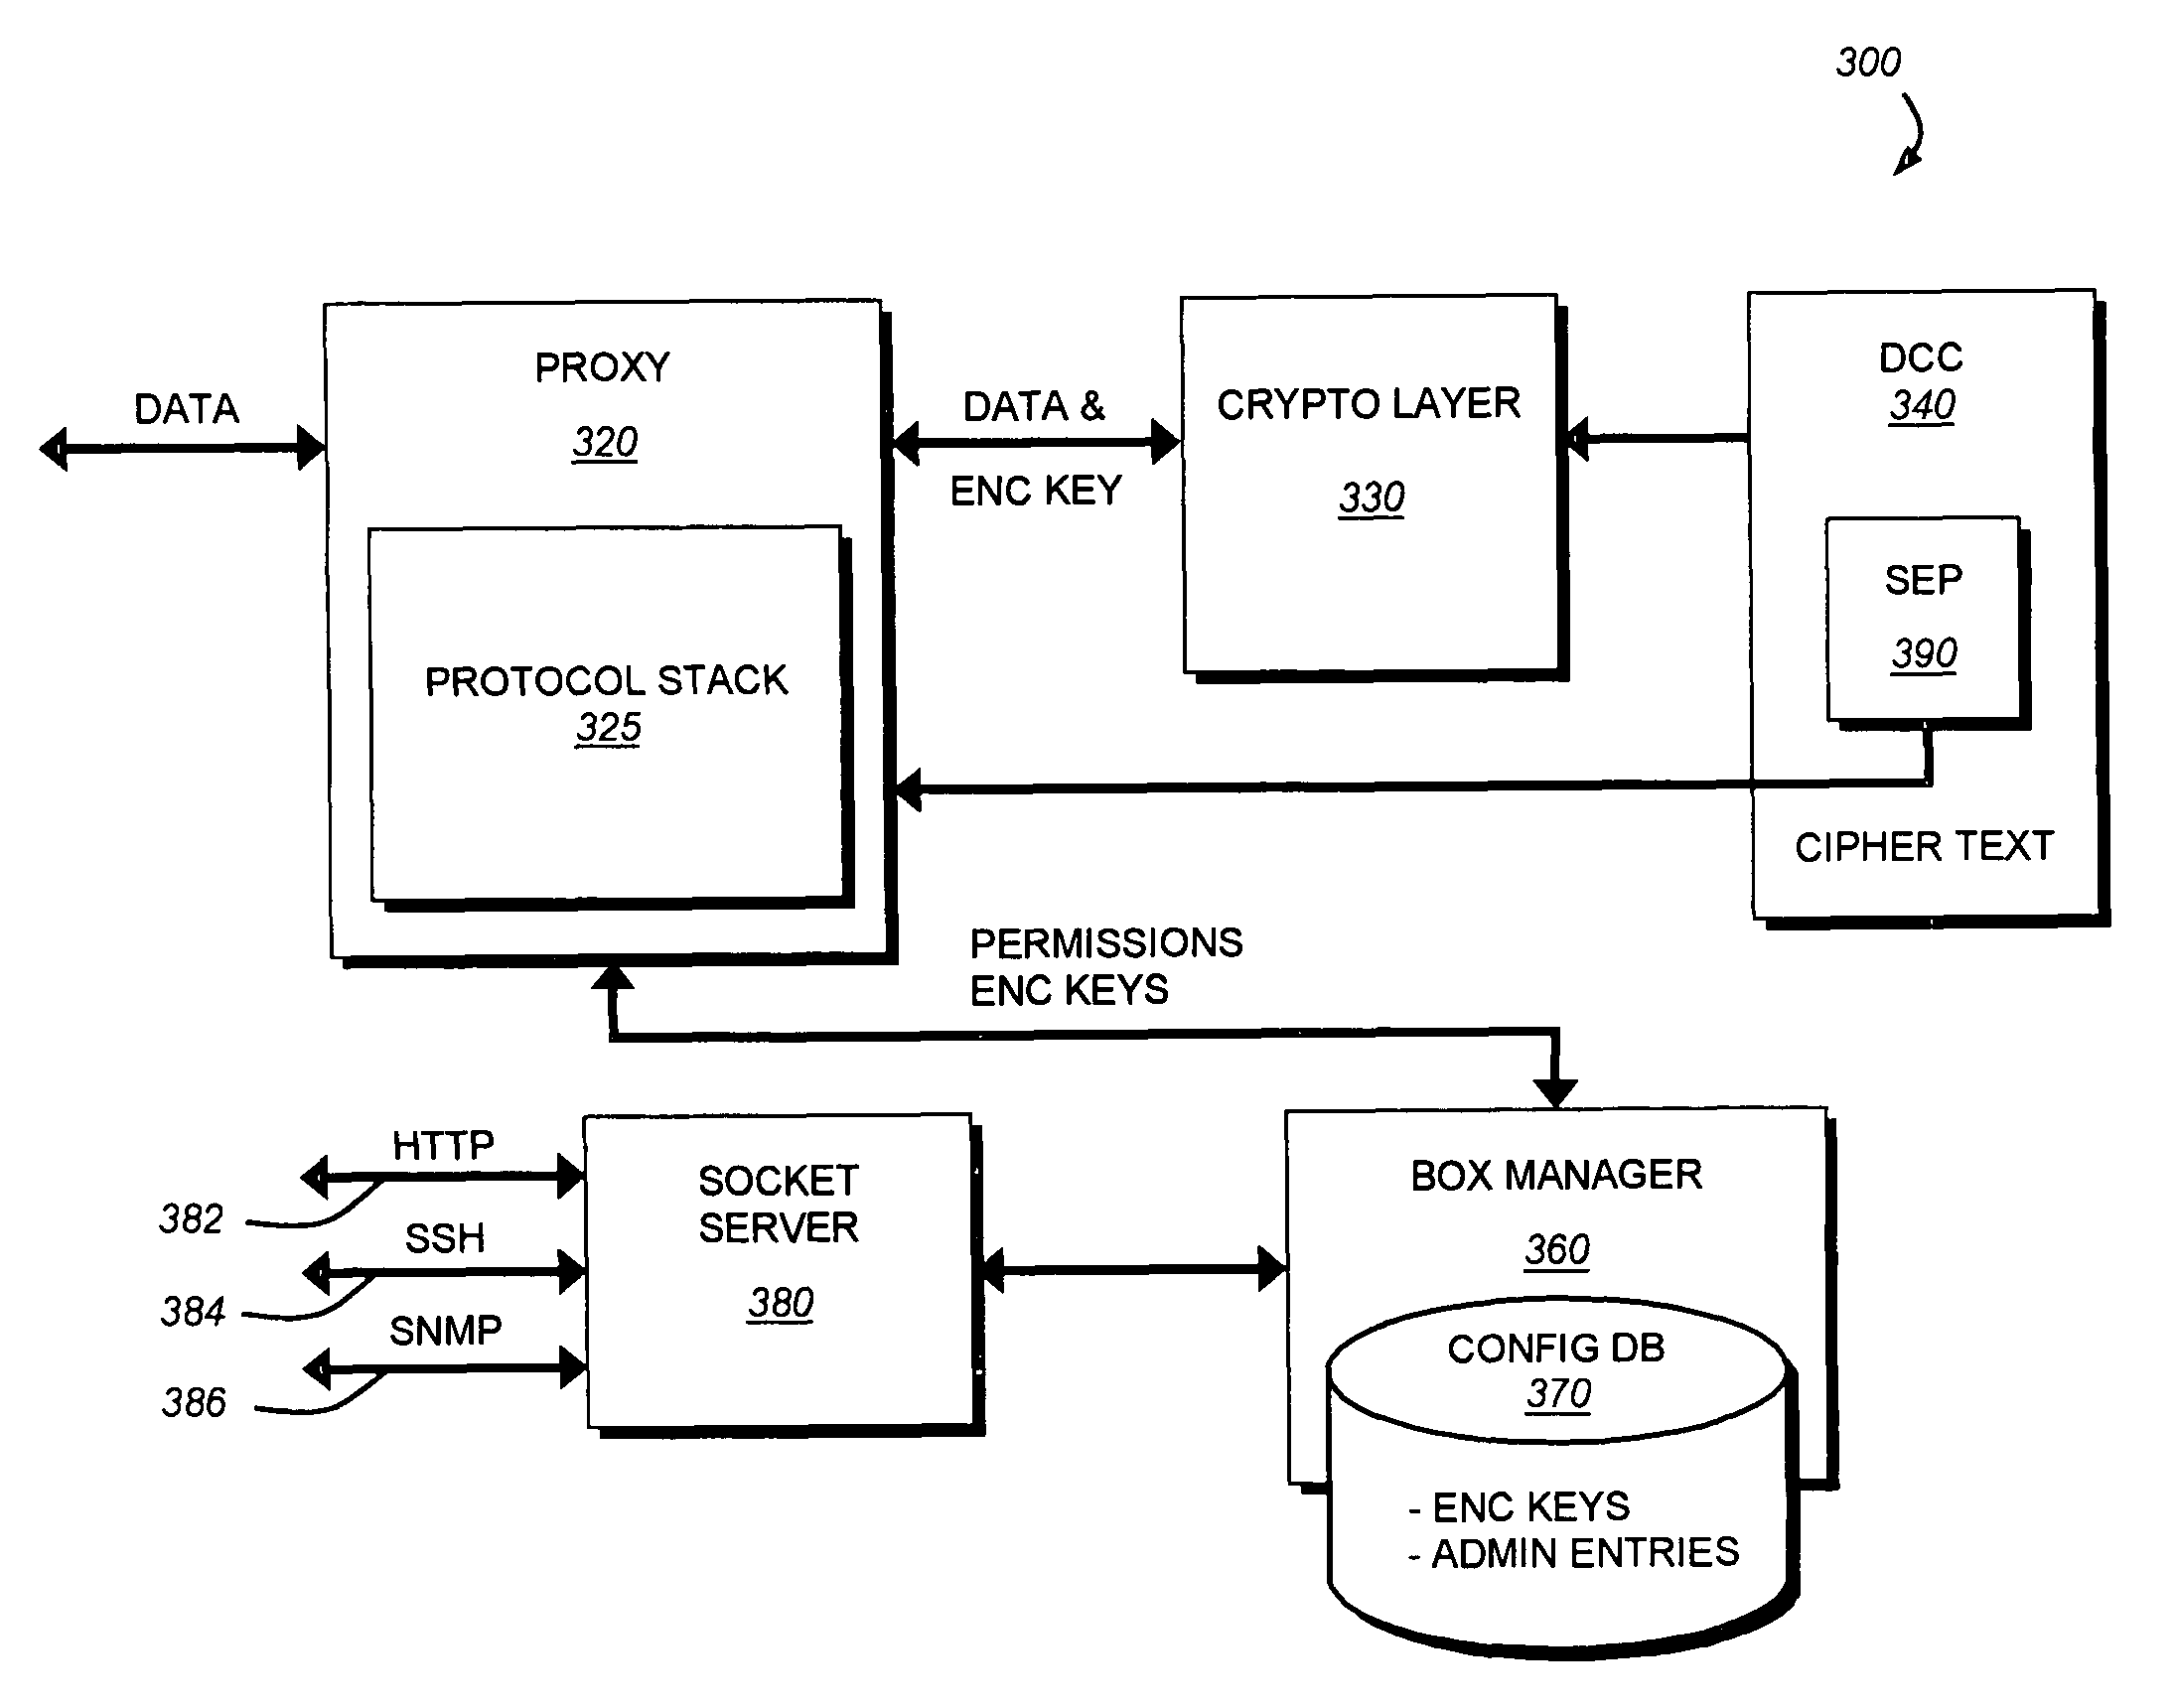 System and method for generating a single use password based on a challenge/response protocol